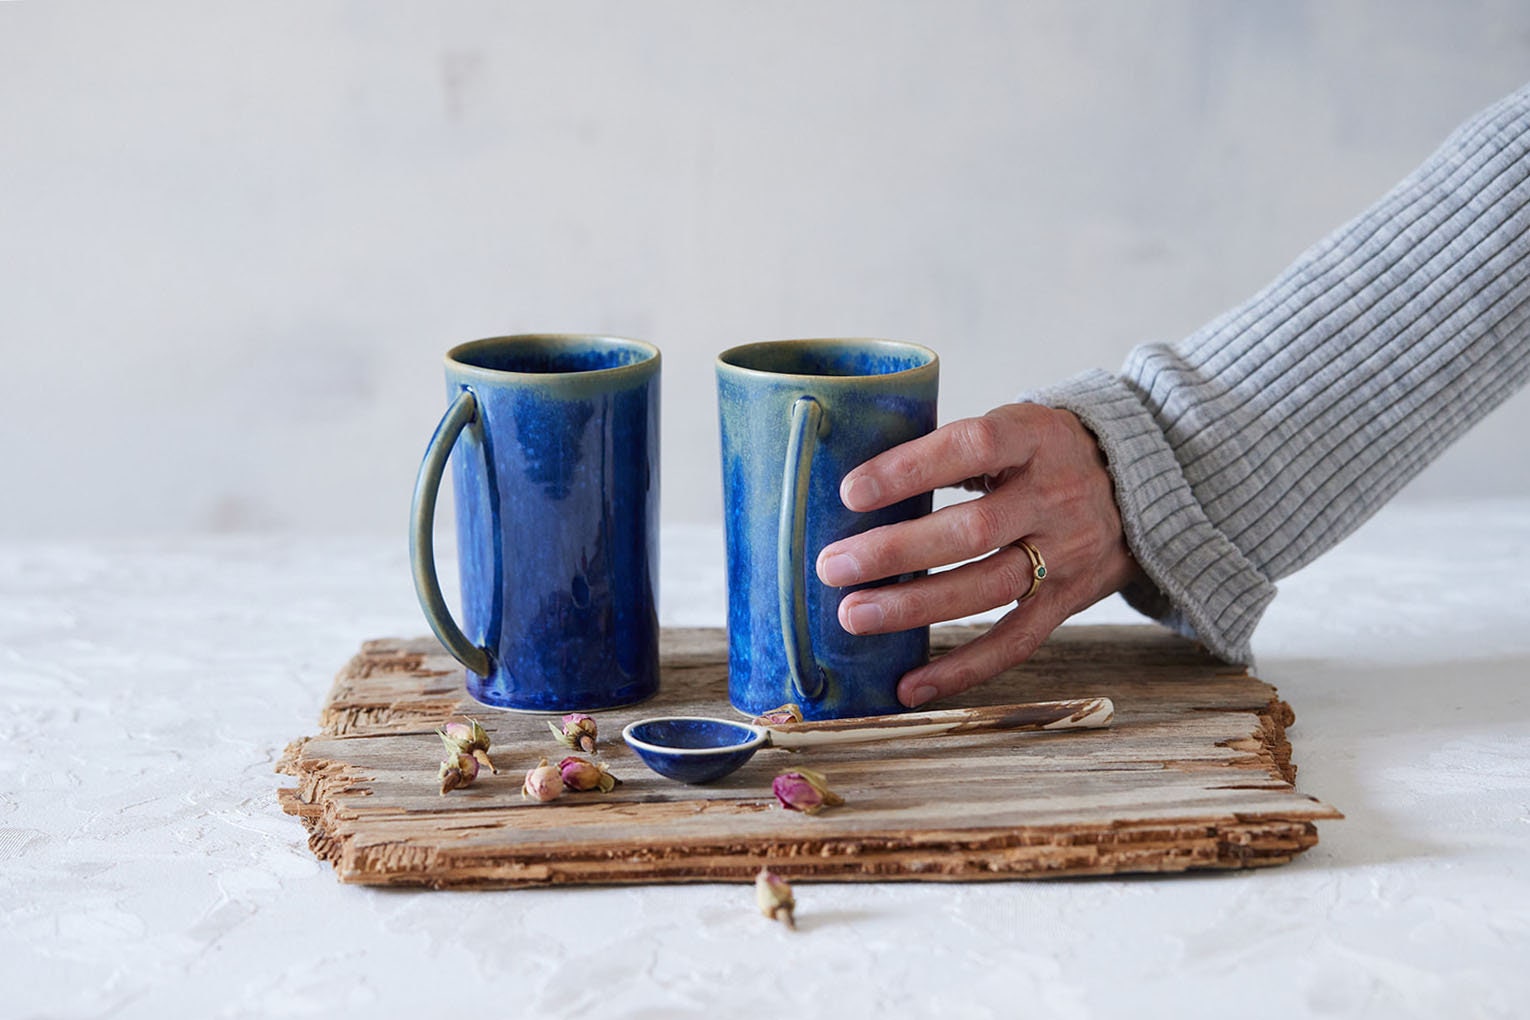 Tall Glazed Ceramic Mug with Matching Spoon - A Classic and Elegant Ch